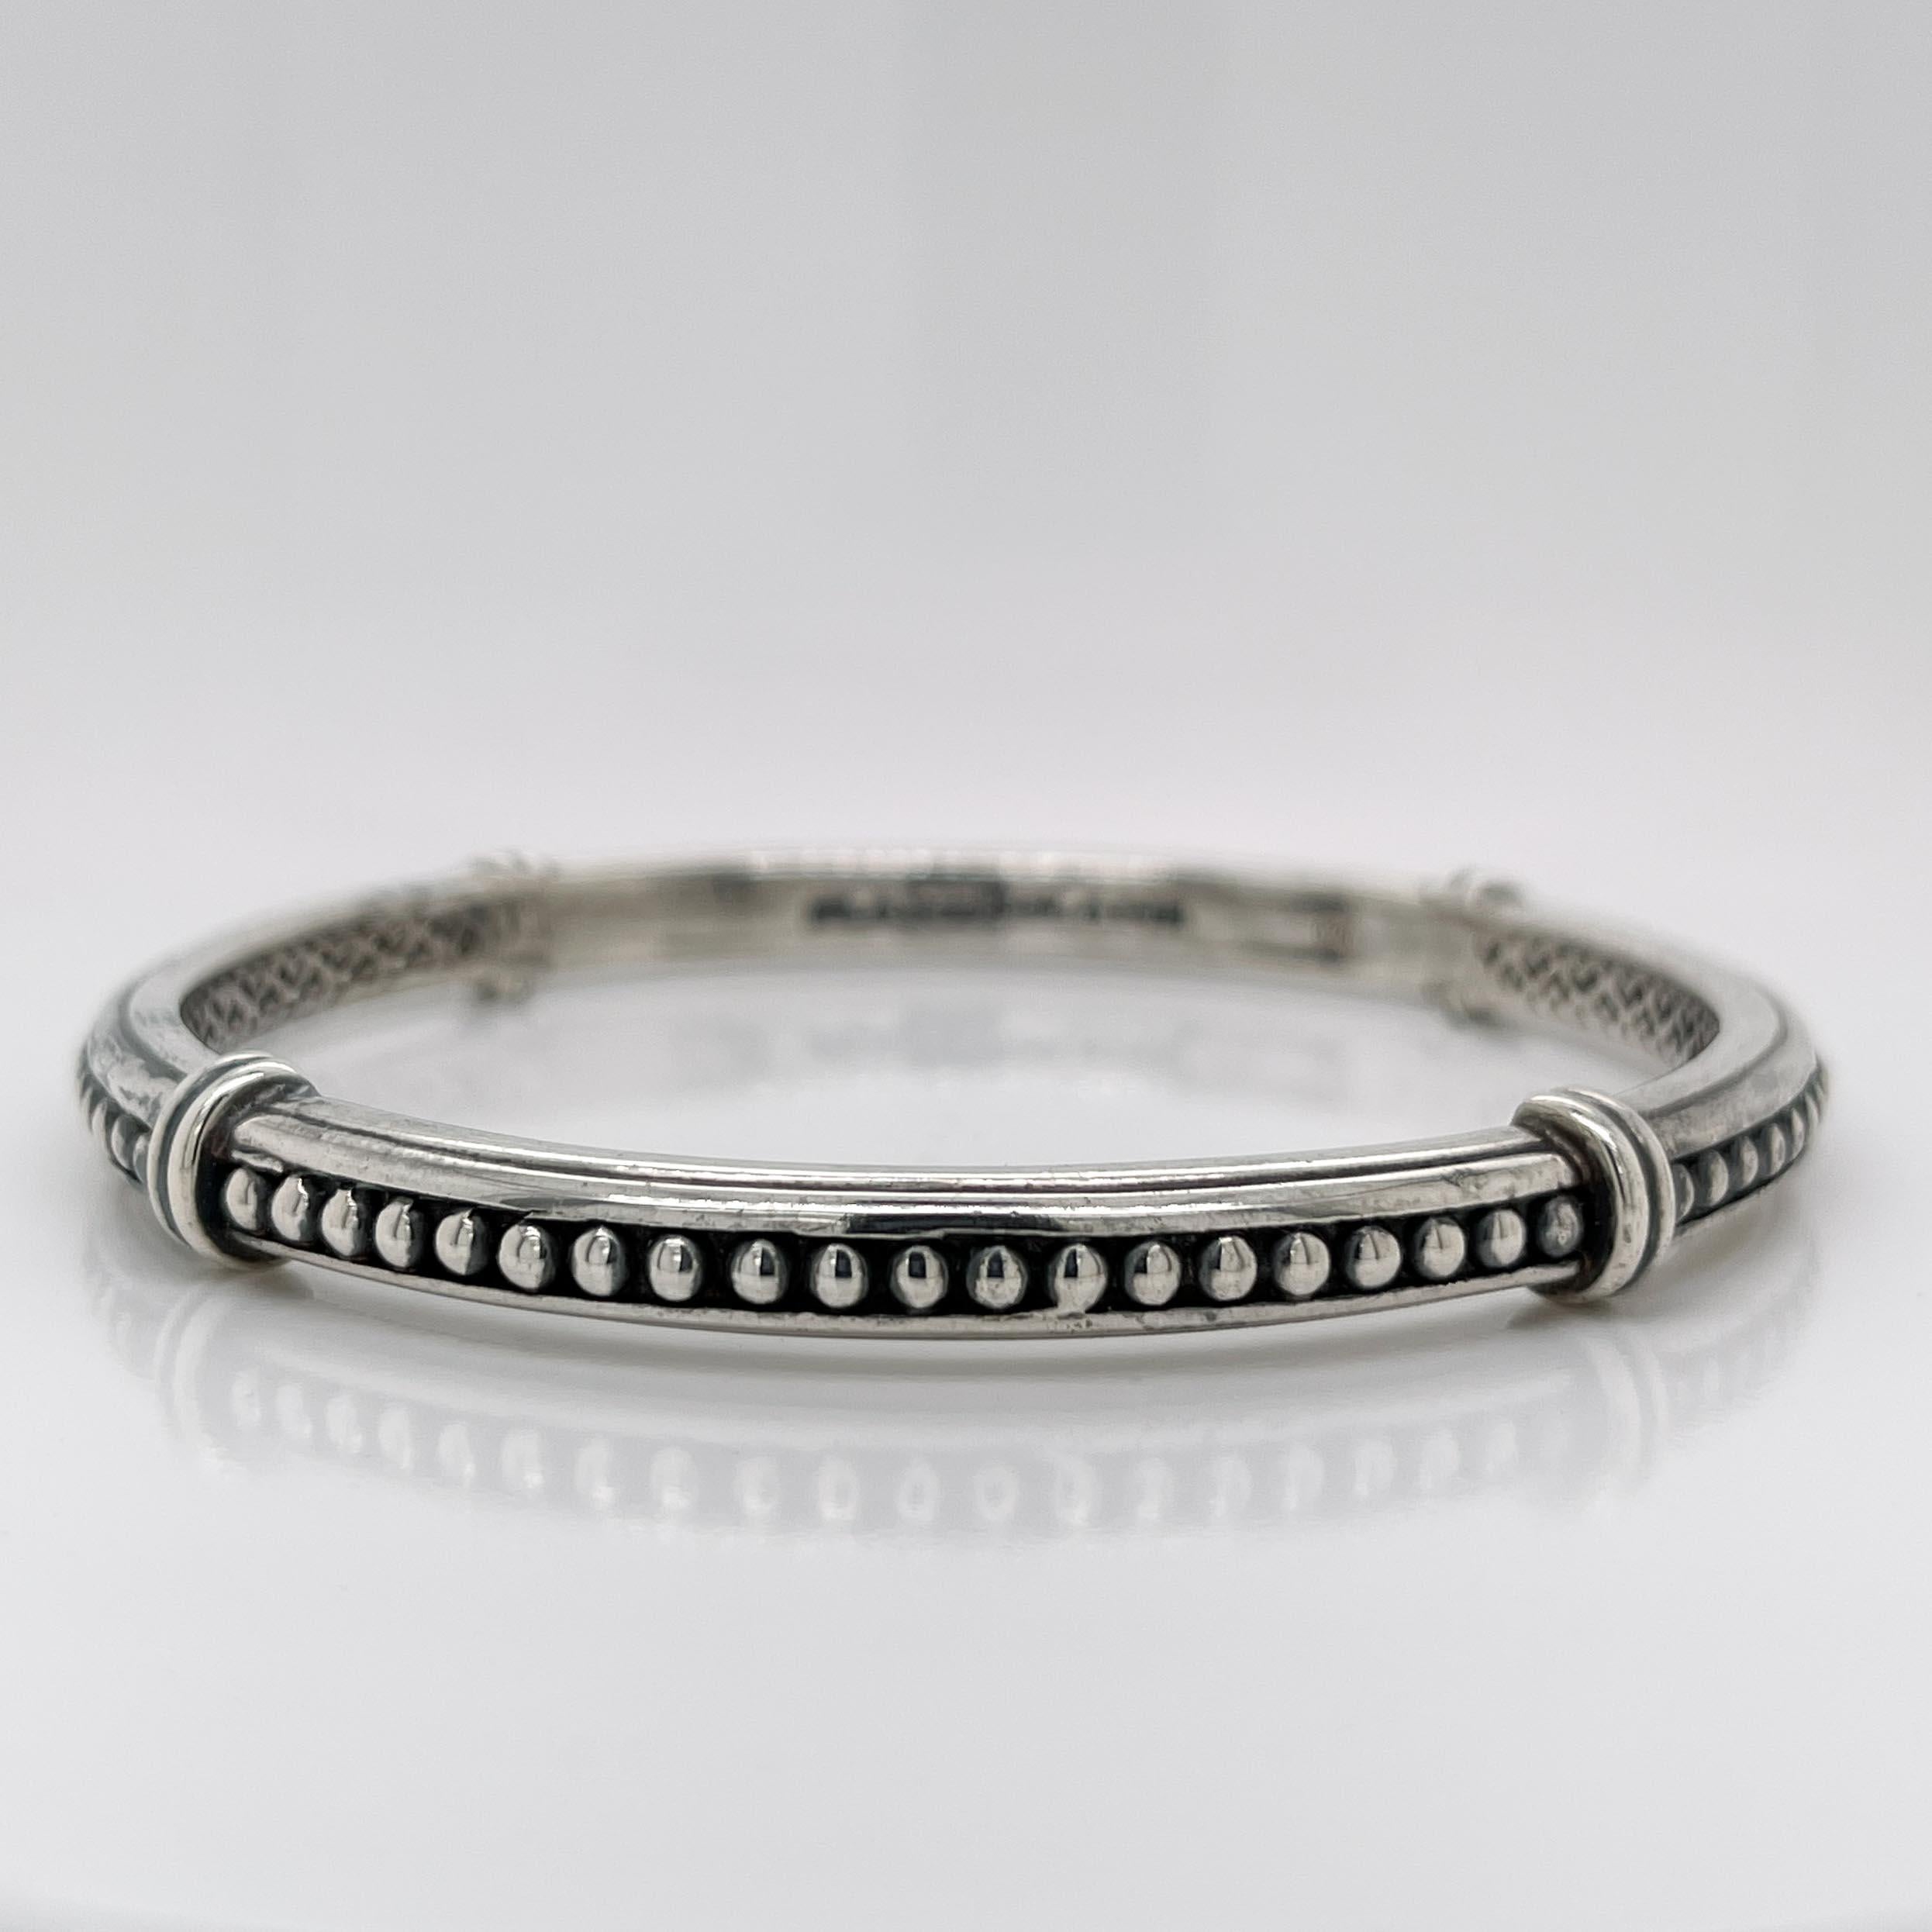 A fine Slane & Slane sterling silver bangle bracelet.

In sterling silver.

By Slane & Slane.

With a silver beaded column channel set between ribbed design and an interior with open work, connecting hearts, and a deeply engraved SLANE & SLANE mark.